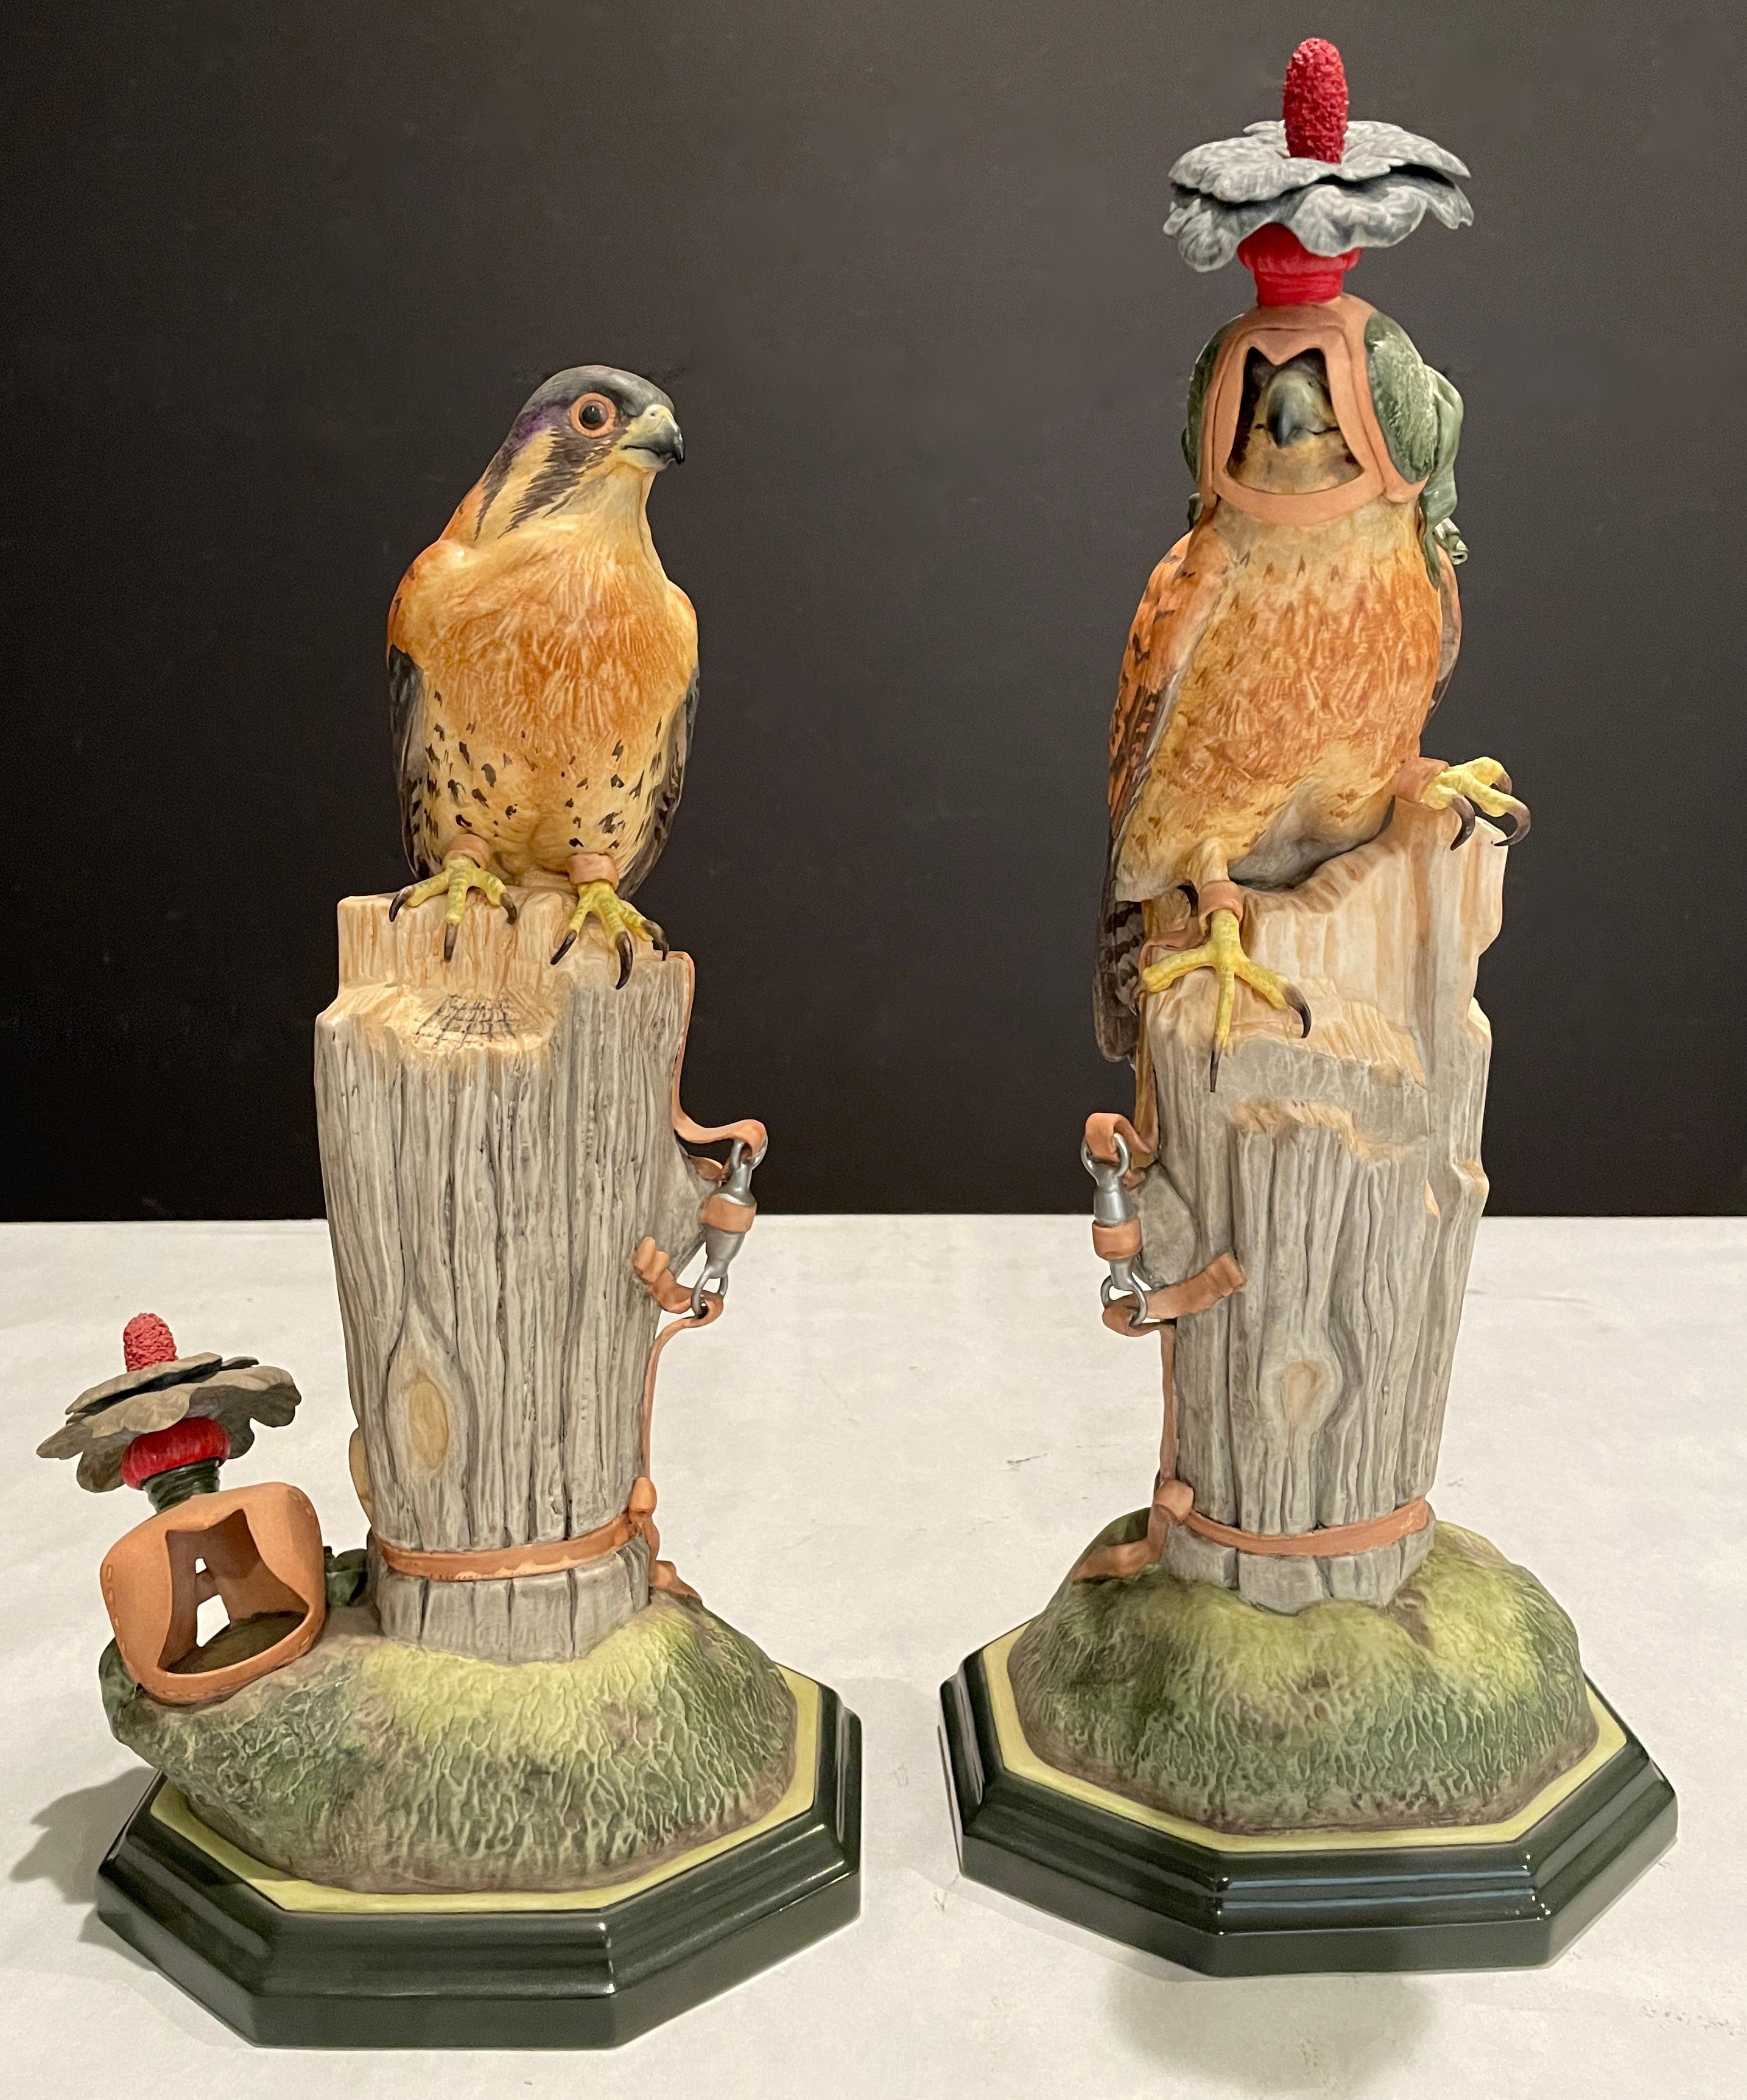 Pair of colorful and beautifully modeled American Kestrels,( Falco Sperverius) also known as a Sparrow Hawk. Limited edition by Boehm porcelain stamped, signed and letter numbered.
H. 16.5
H. 14.5